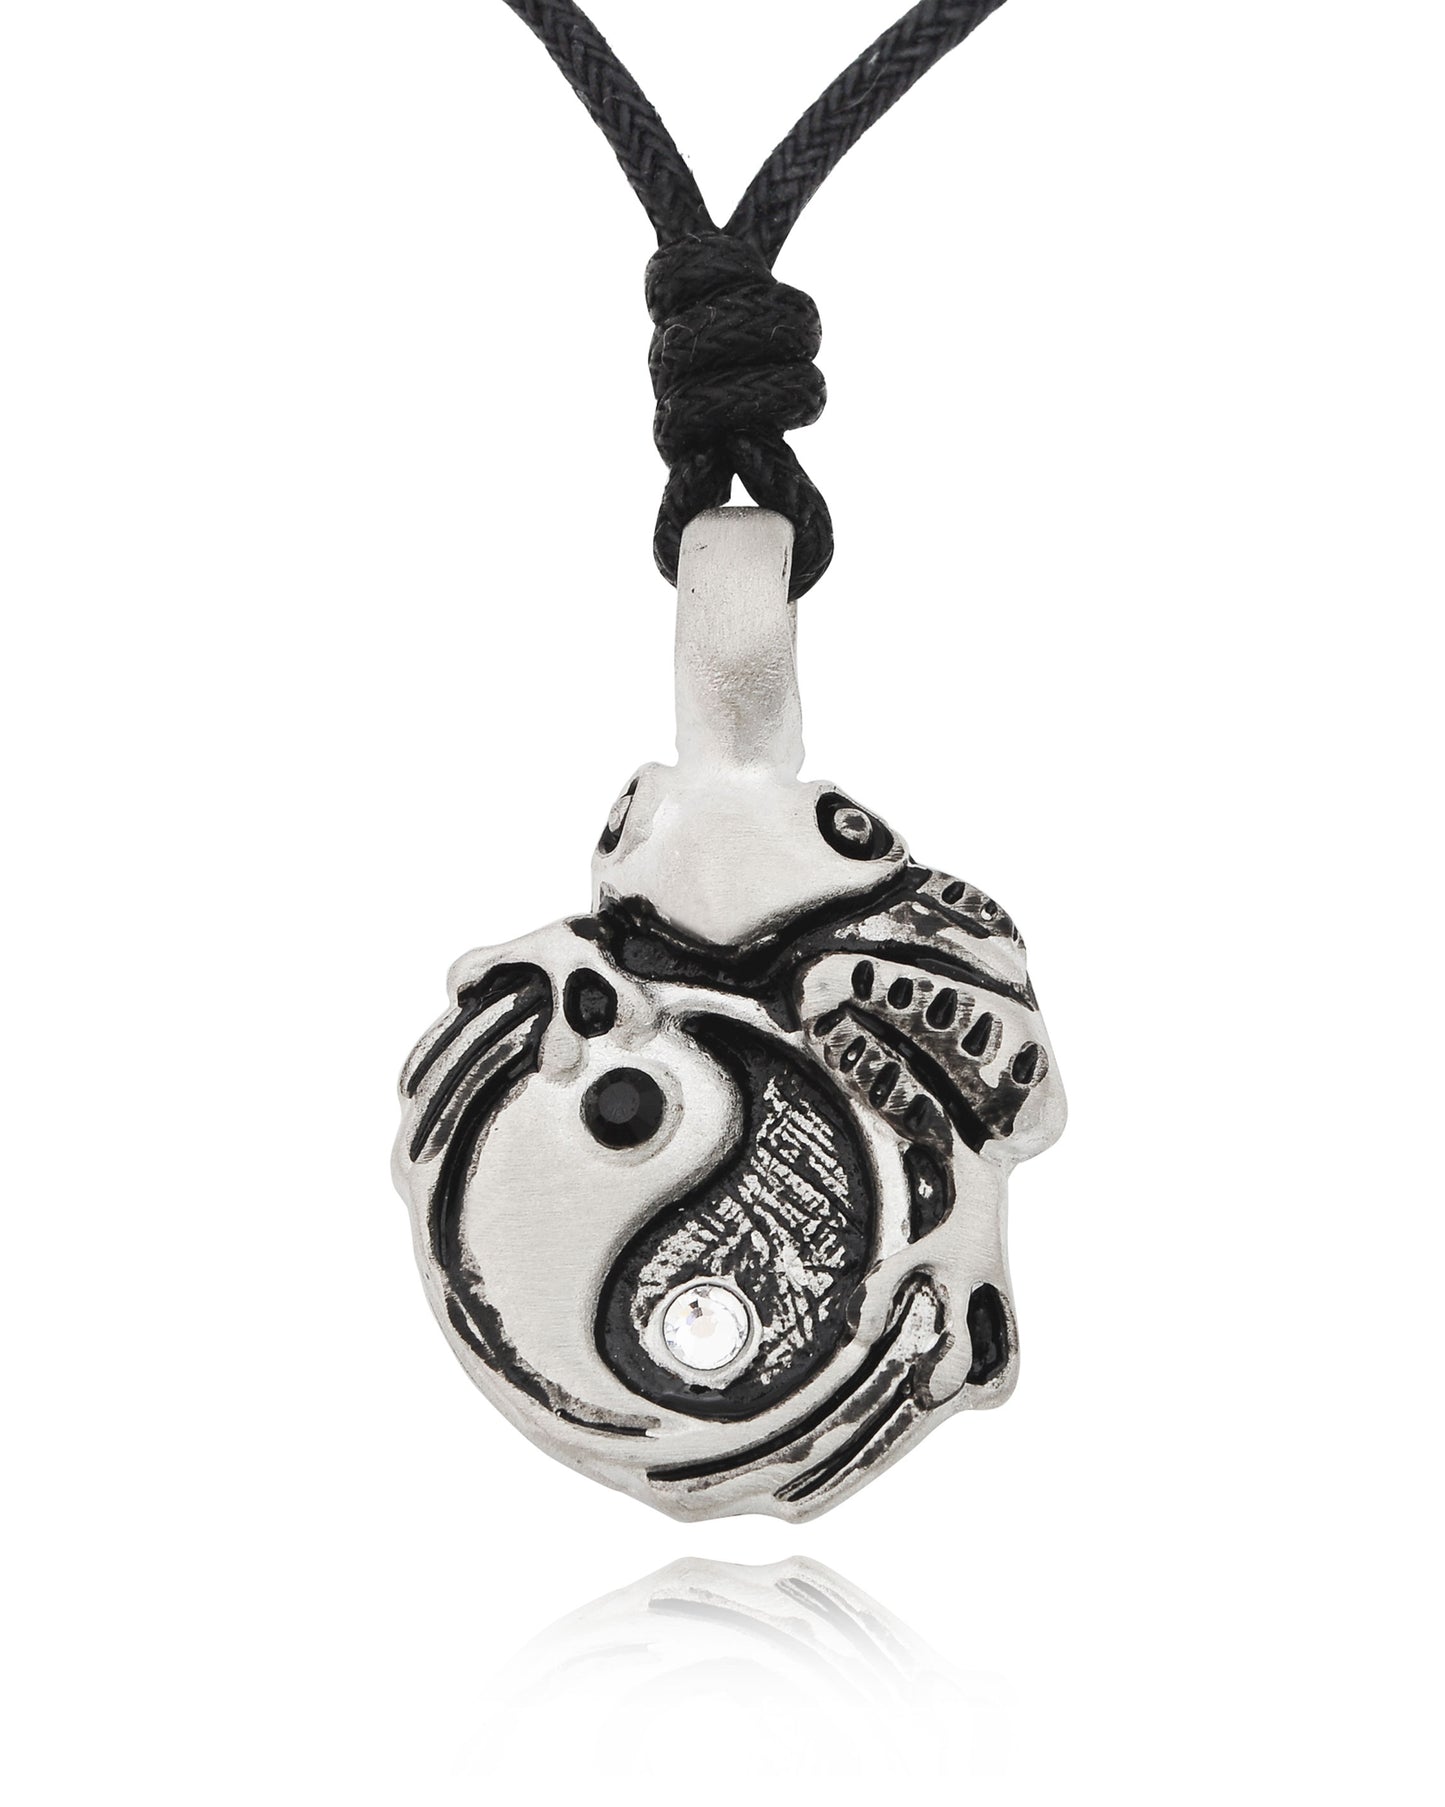 Frog Yin Yang Silver Pewter Charm Necklace Pendant Jewelry